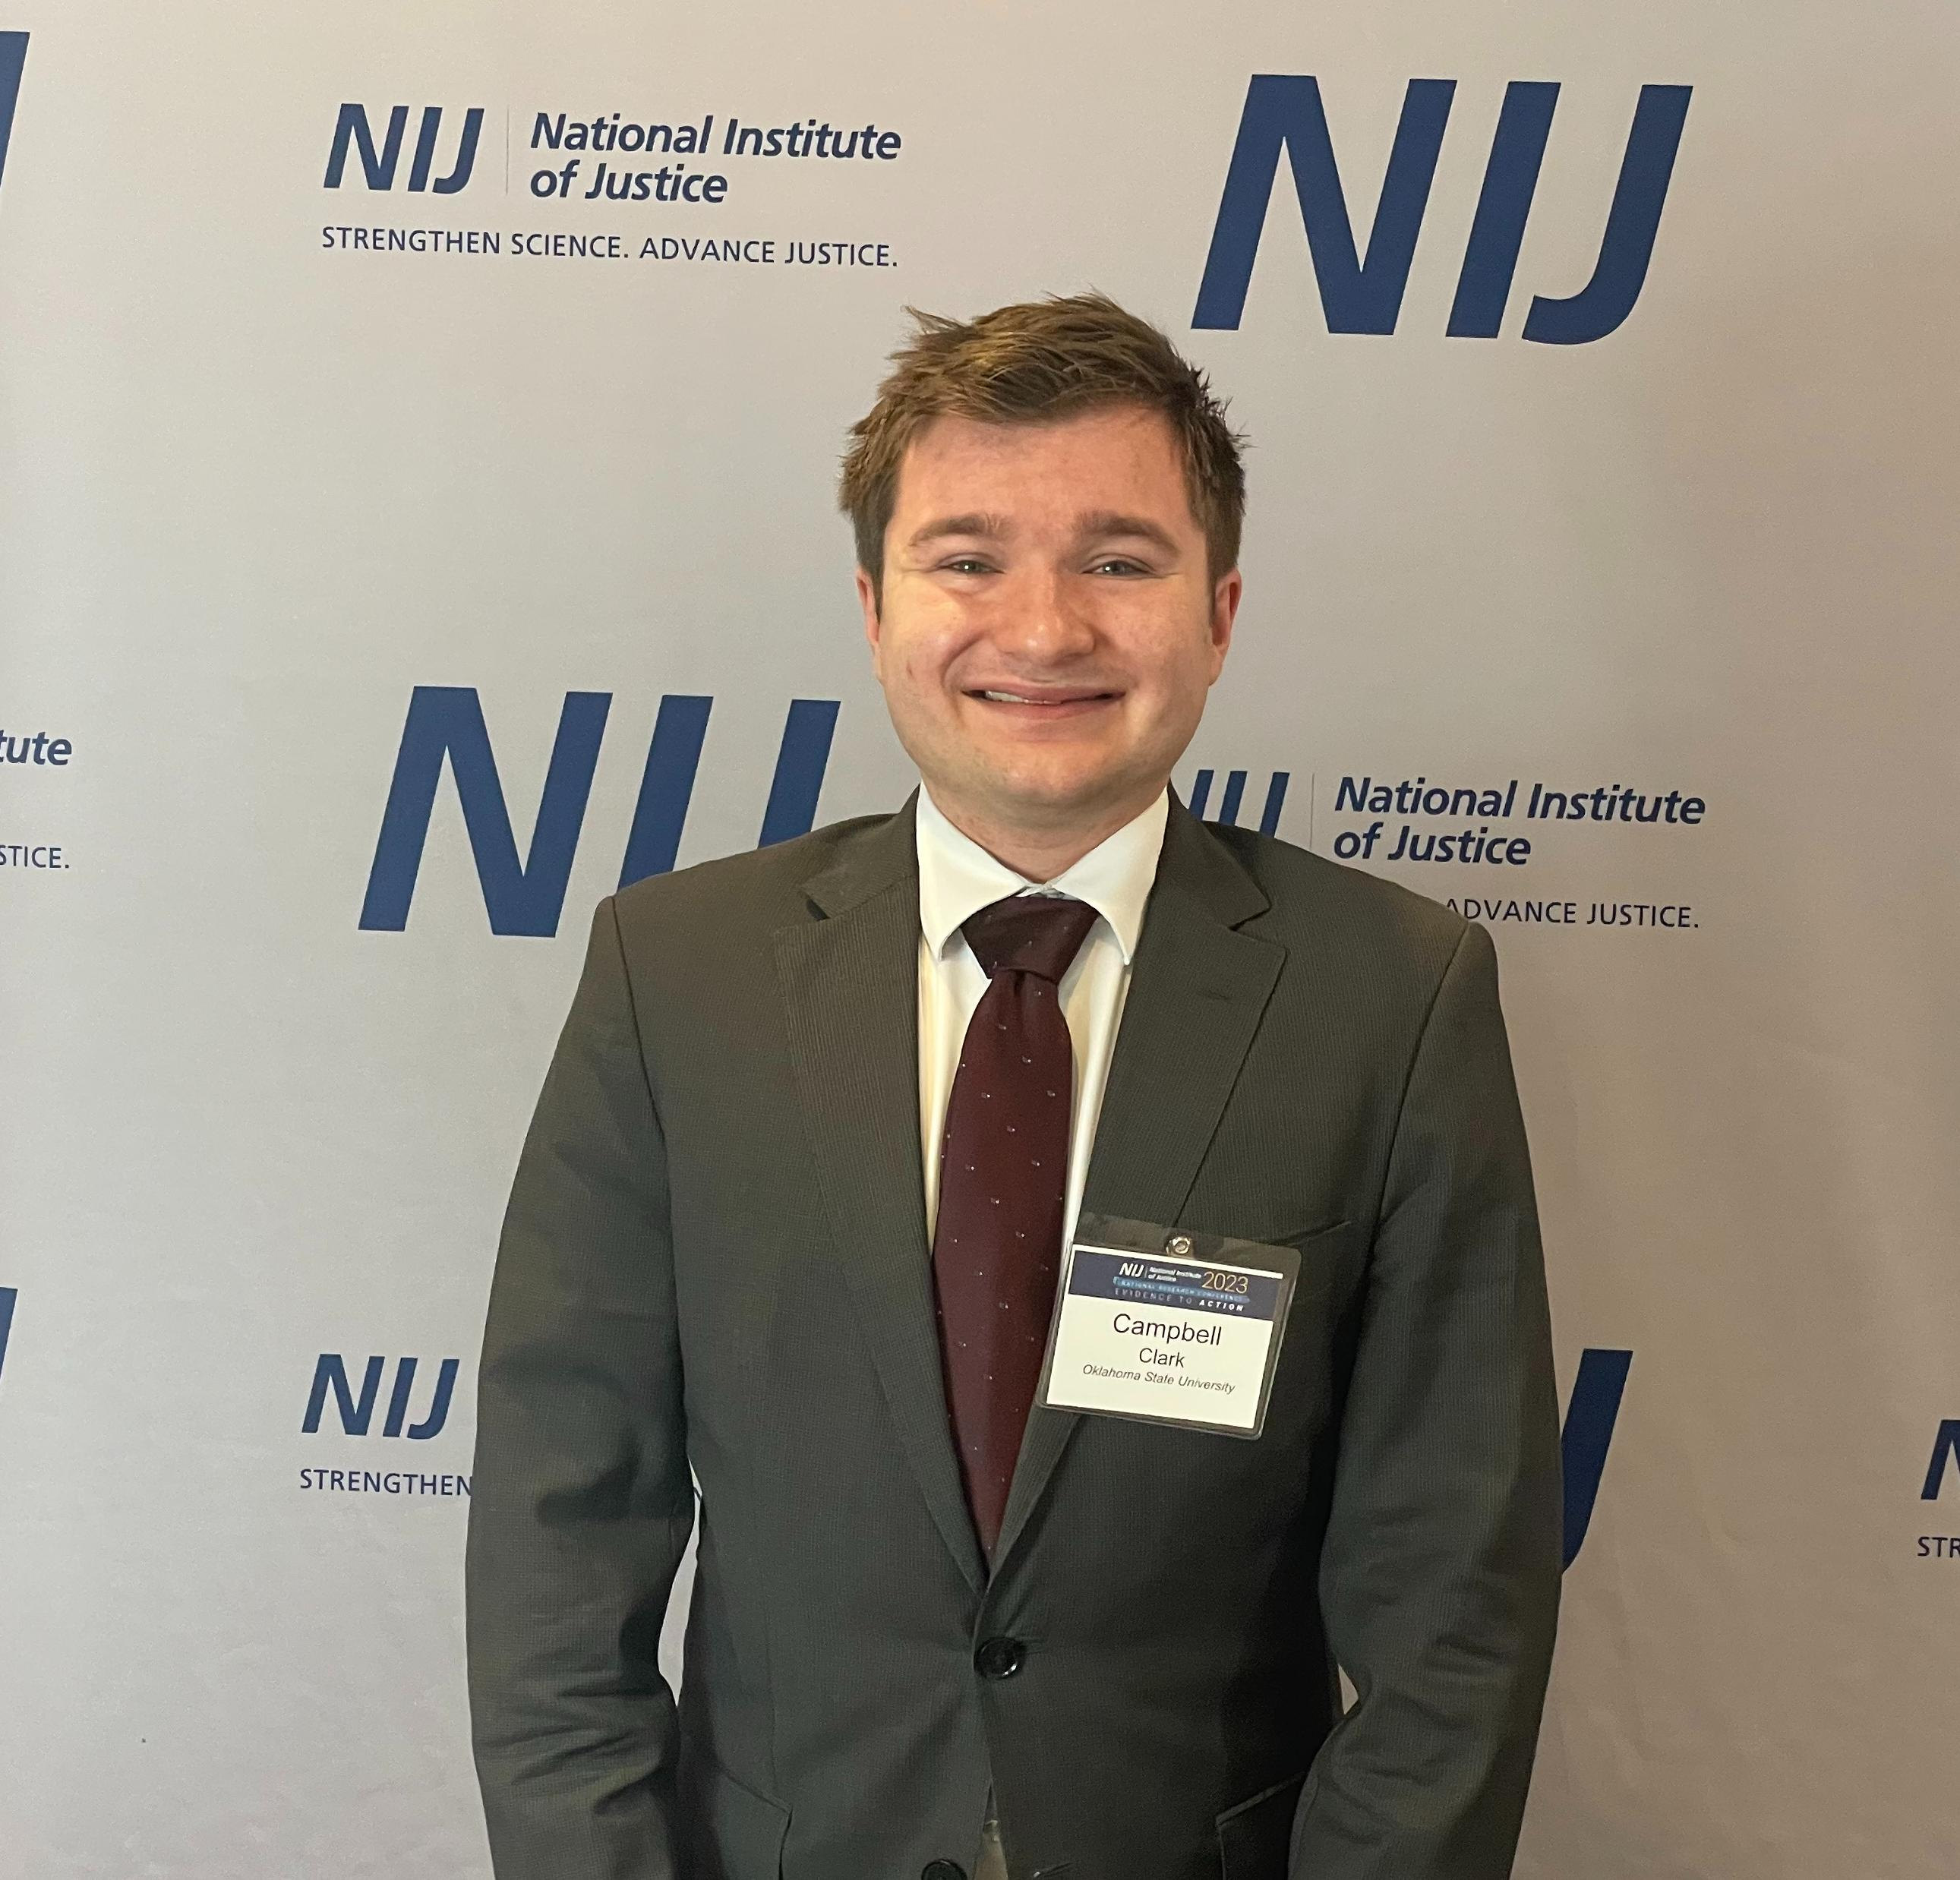 MESA student Campbell Clark attends NIJ's National Research Conference